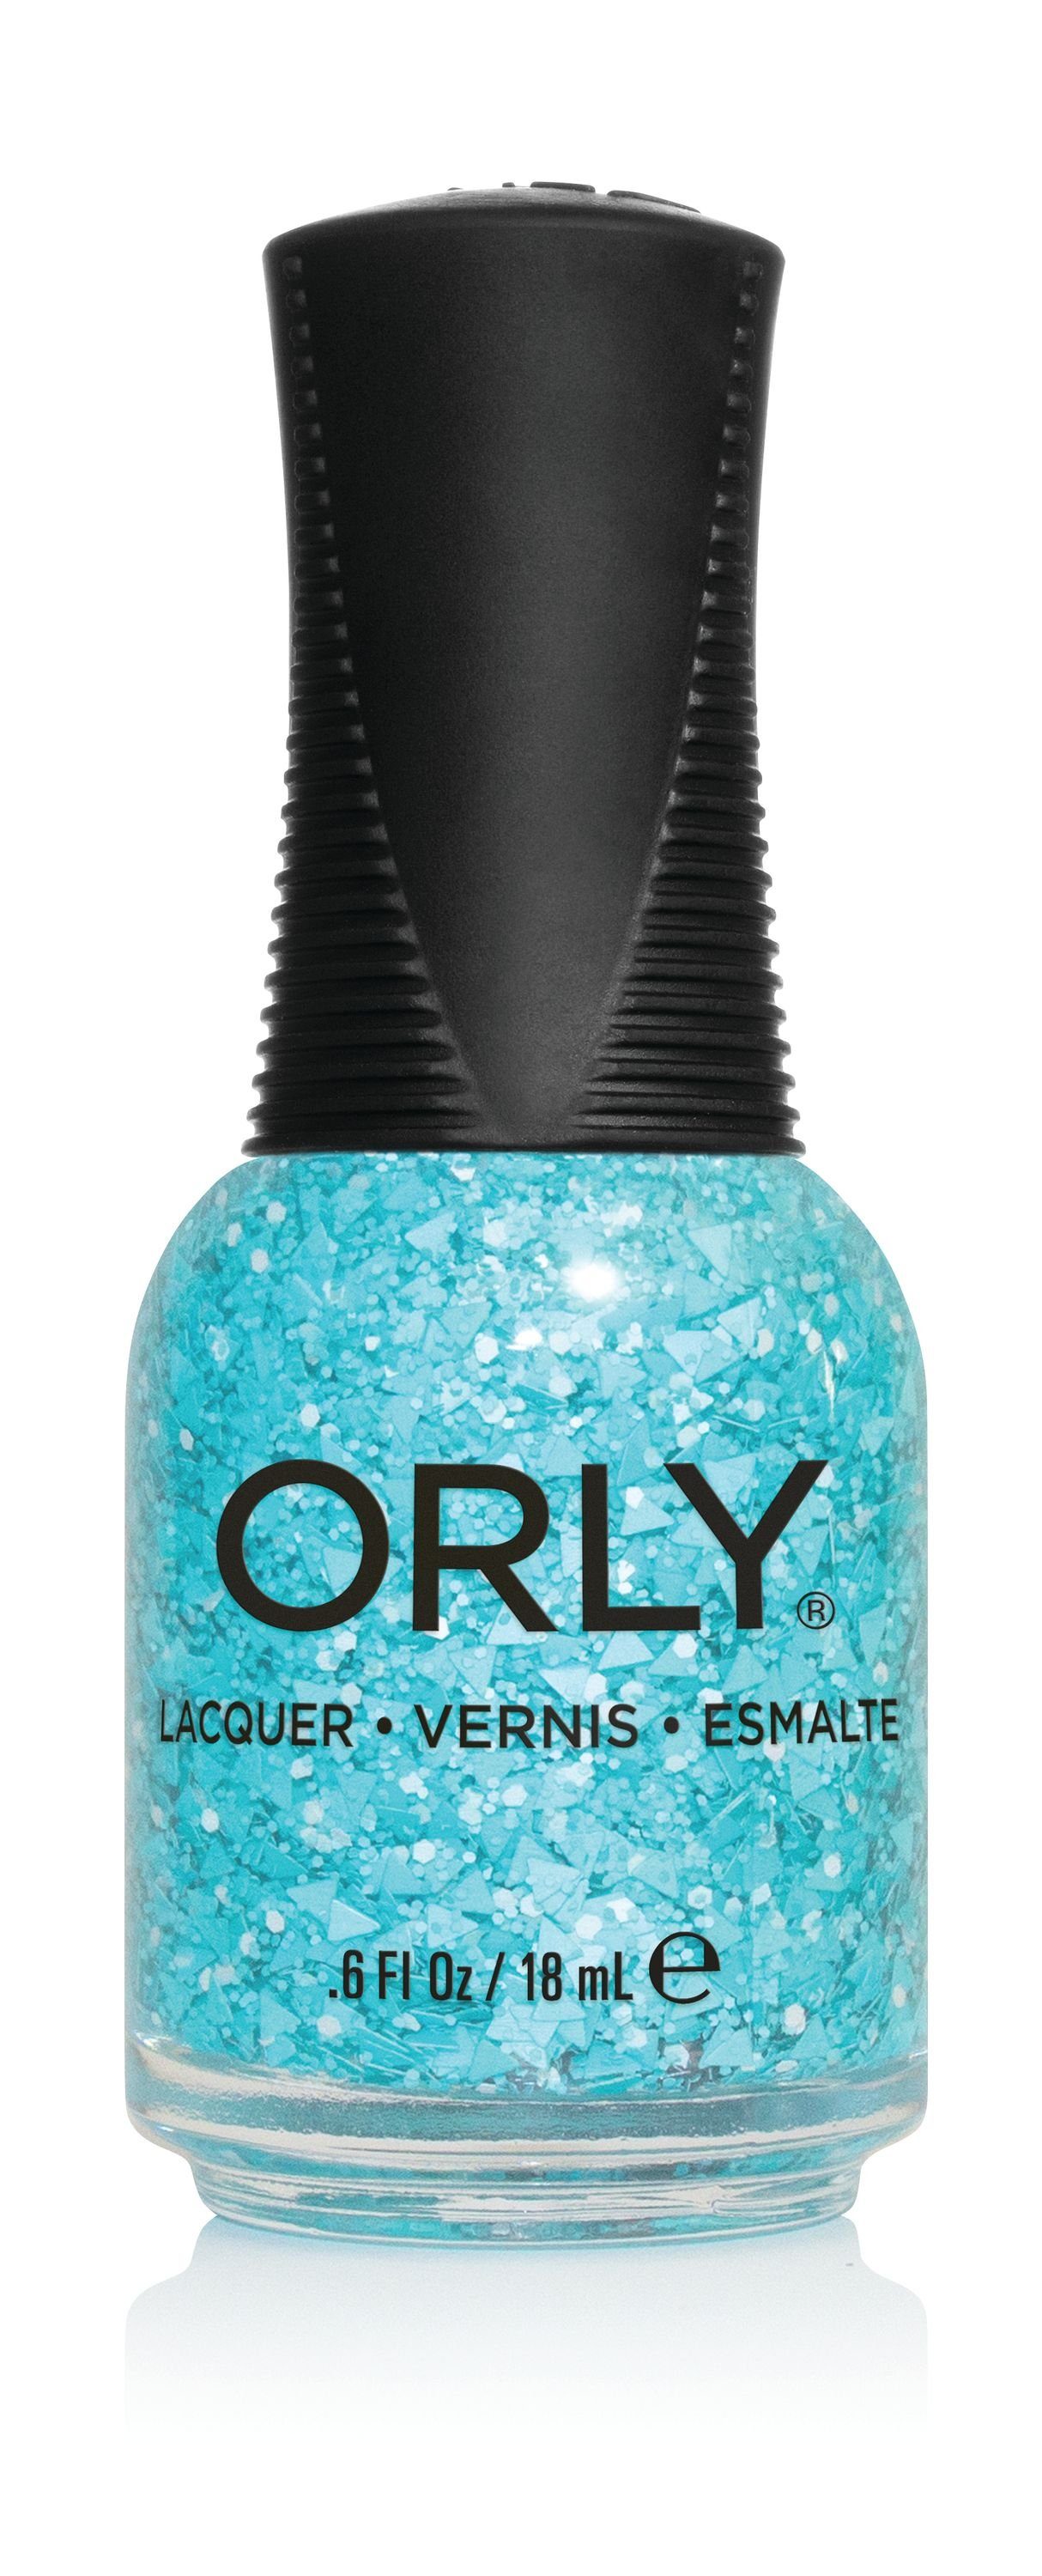 ORLY Nagellack The Nagellack Teal, 18ML - What's Big ORLY